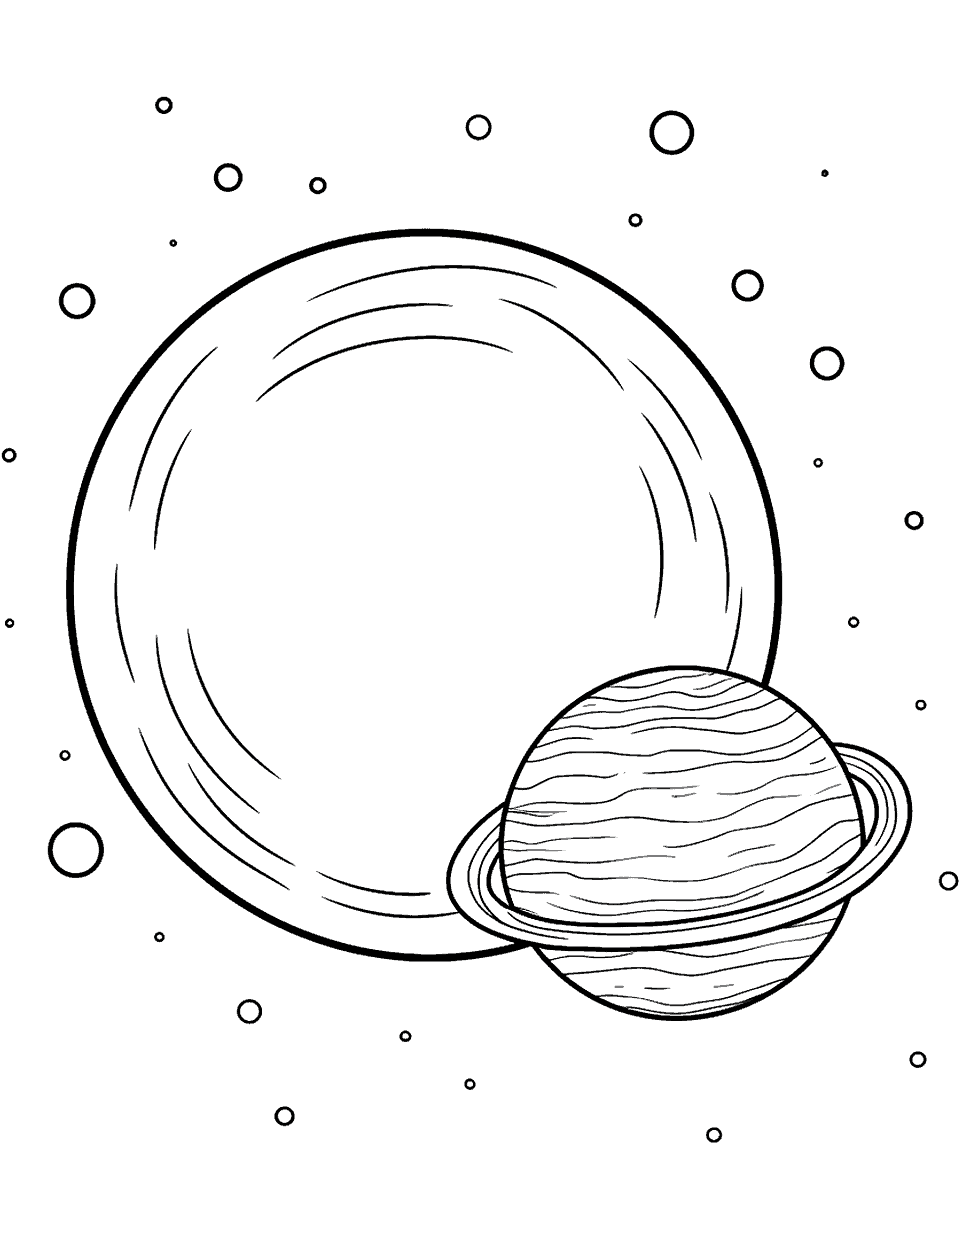 Pluto and Charon Solar System Coloring Page - Pluto and its moon shown together.